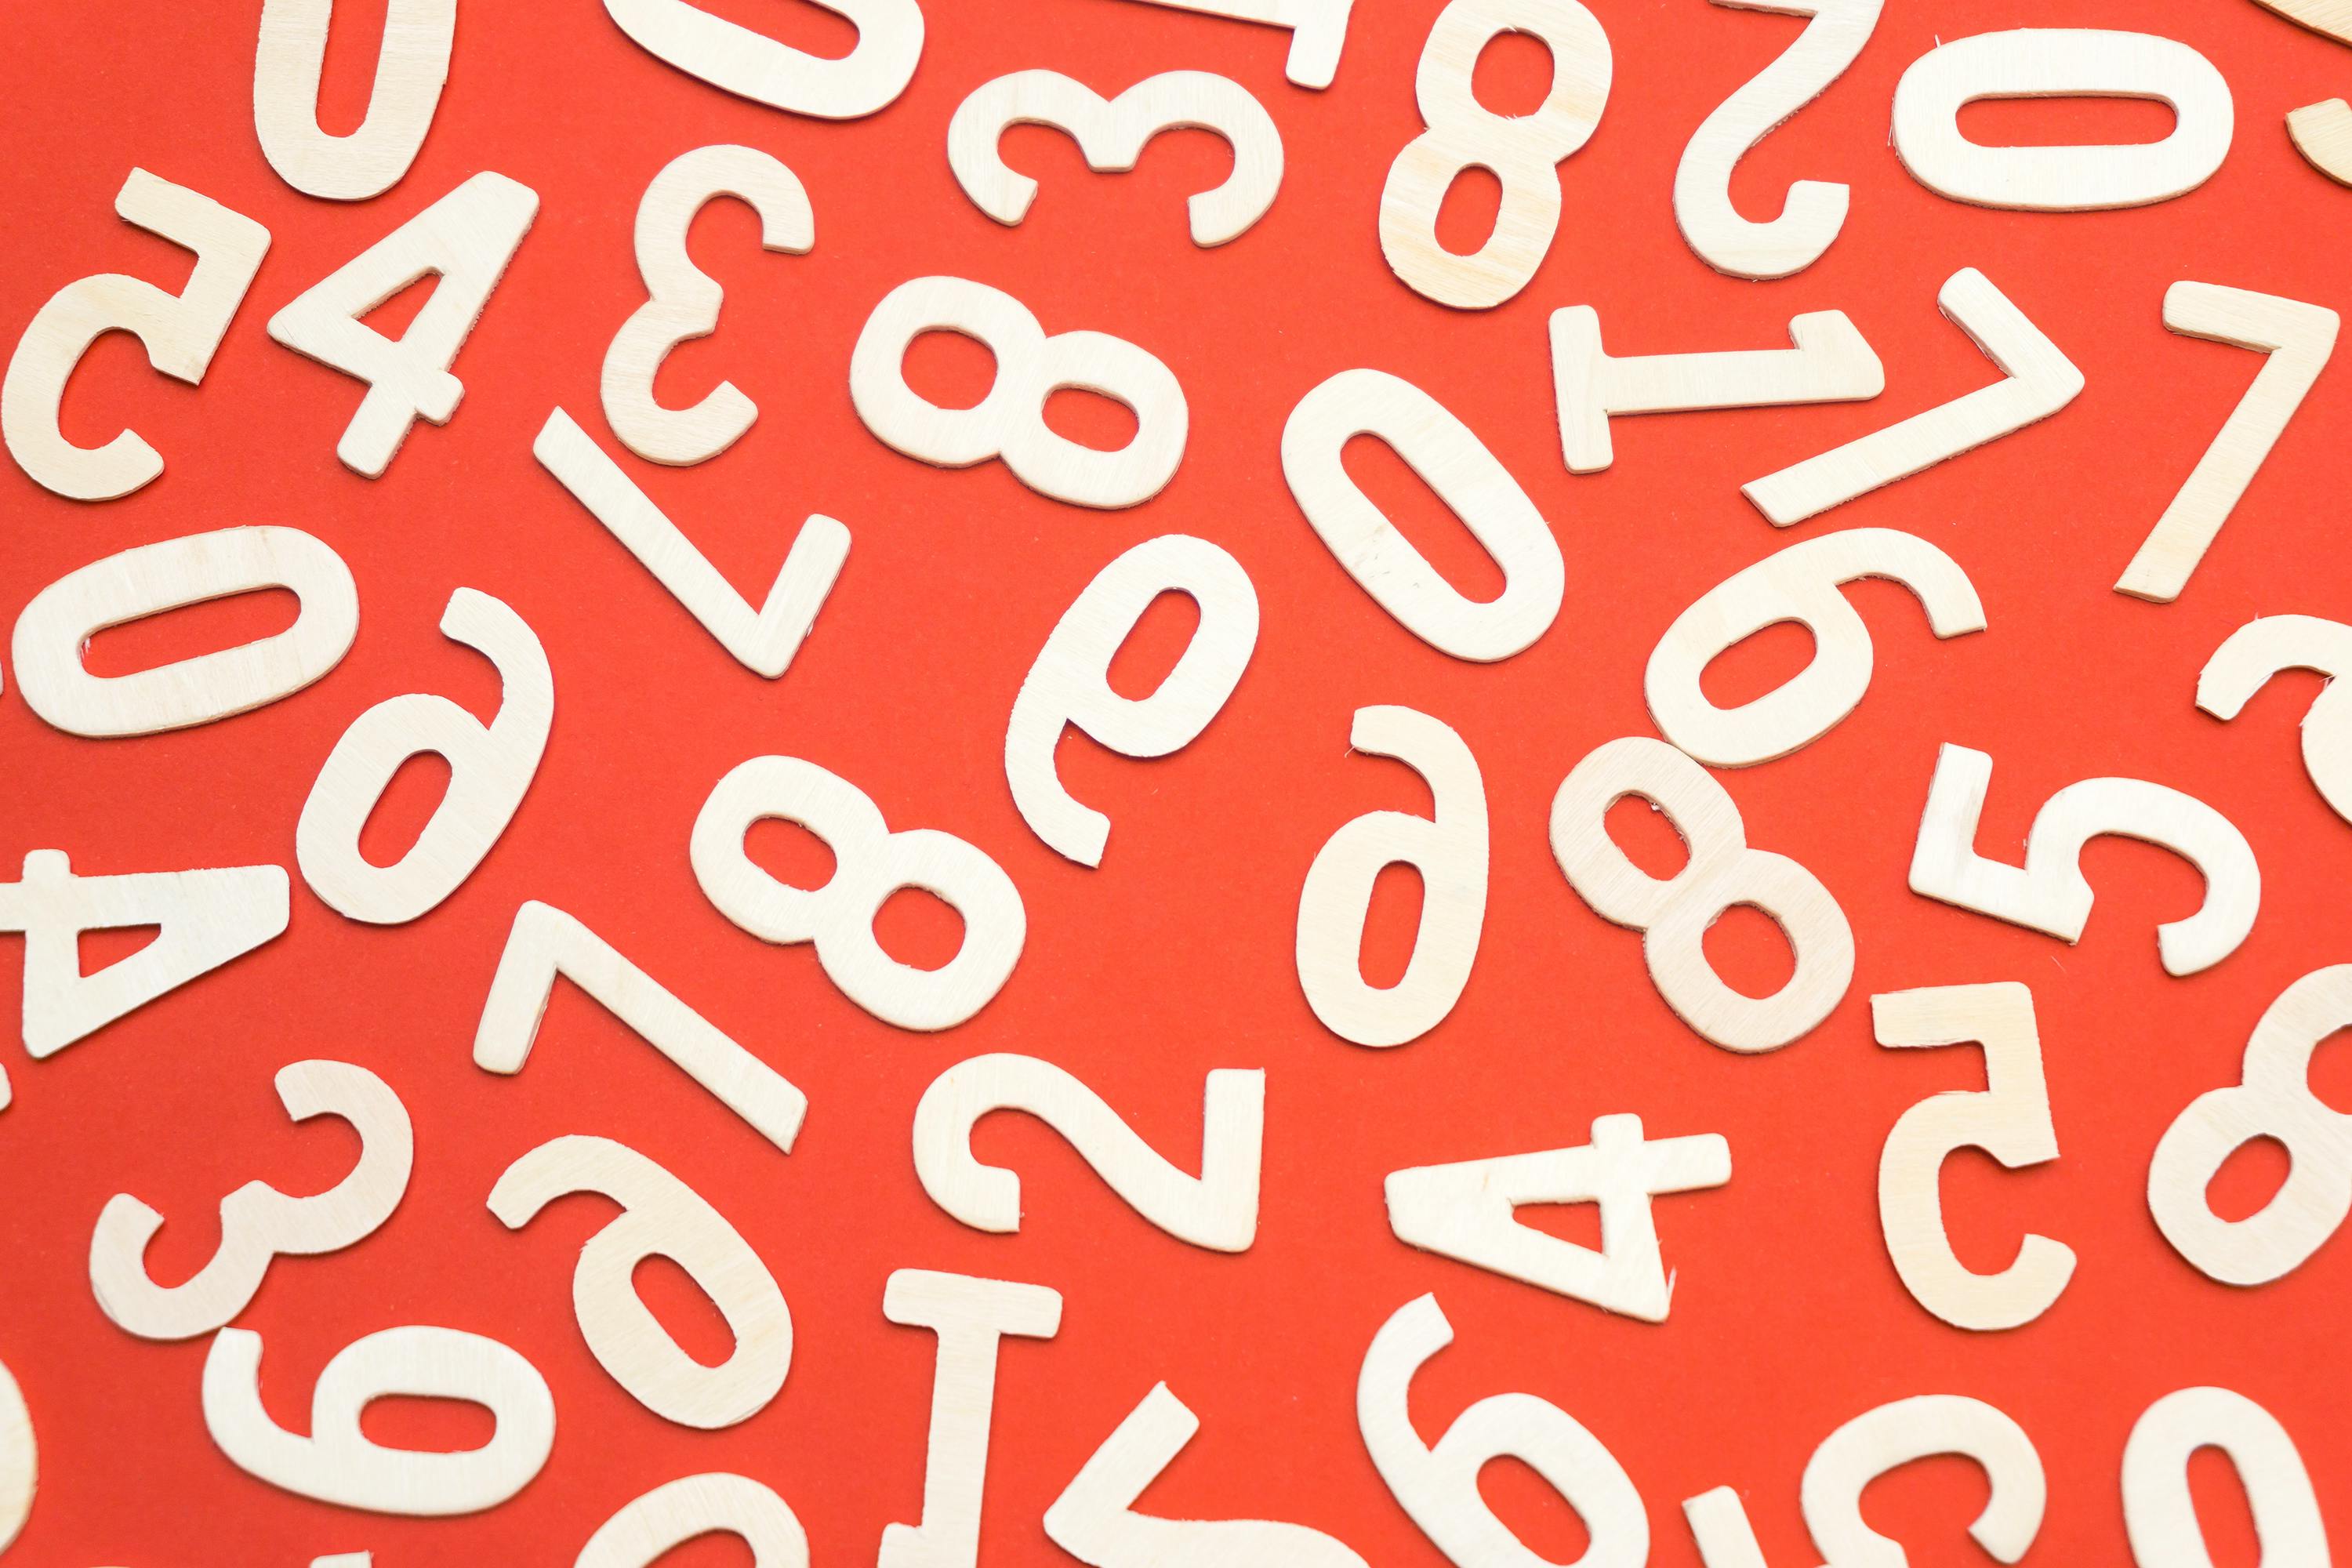 lots-of-numbers-free-stock-photo